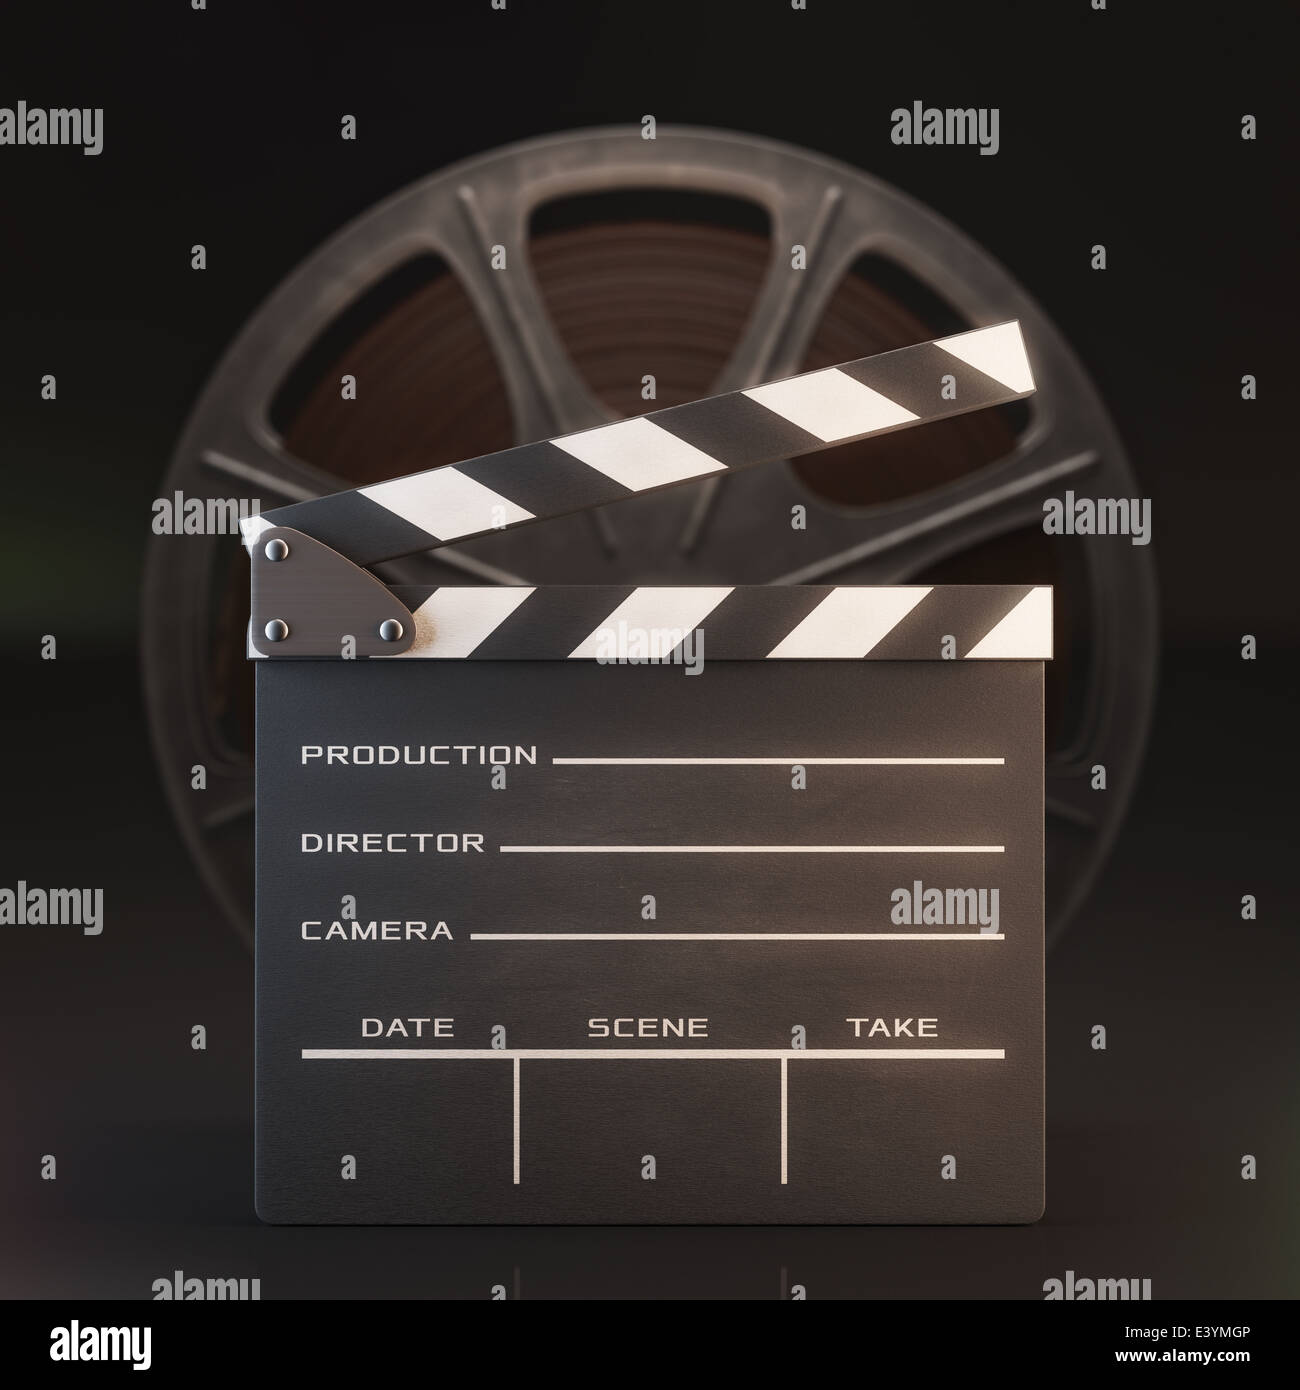 Clapperboard in the foreground with a roll of film in the background. Stock Photo